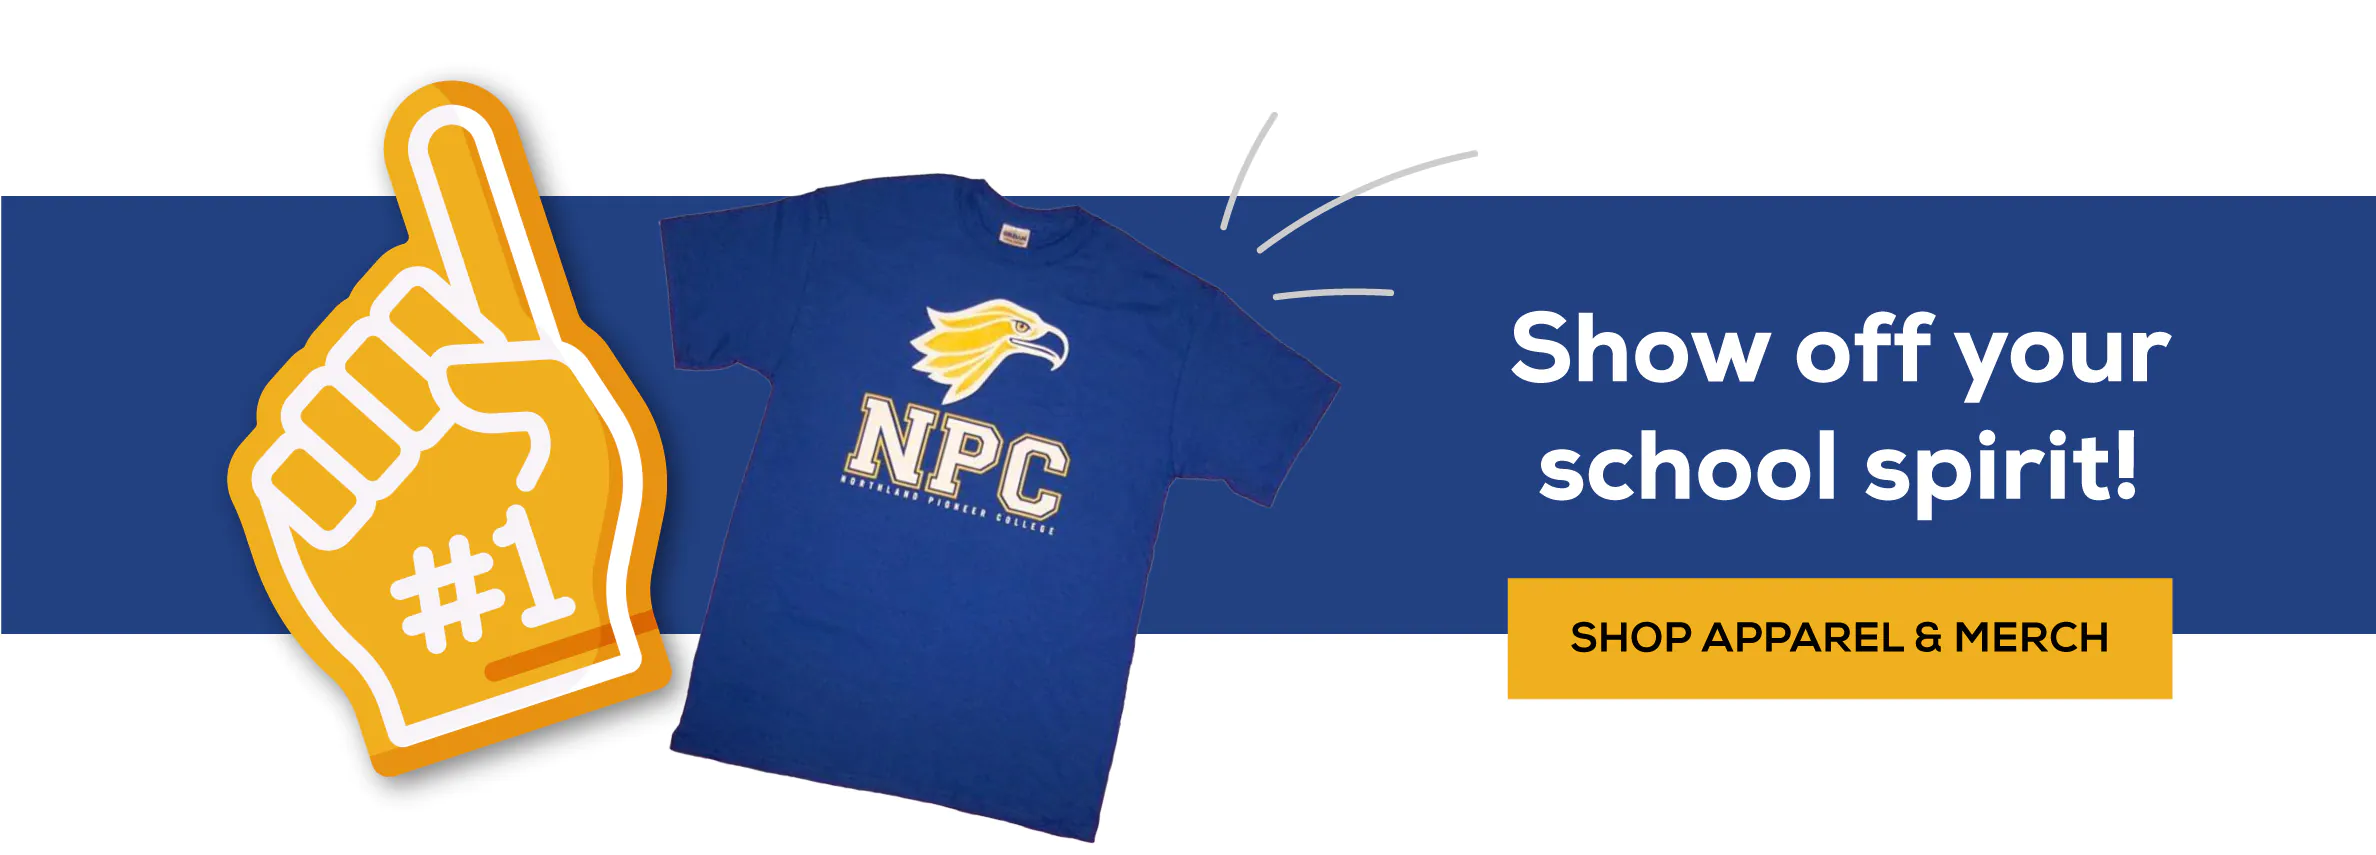 Show off your school sprit! shop apparel and merch